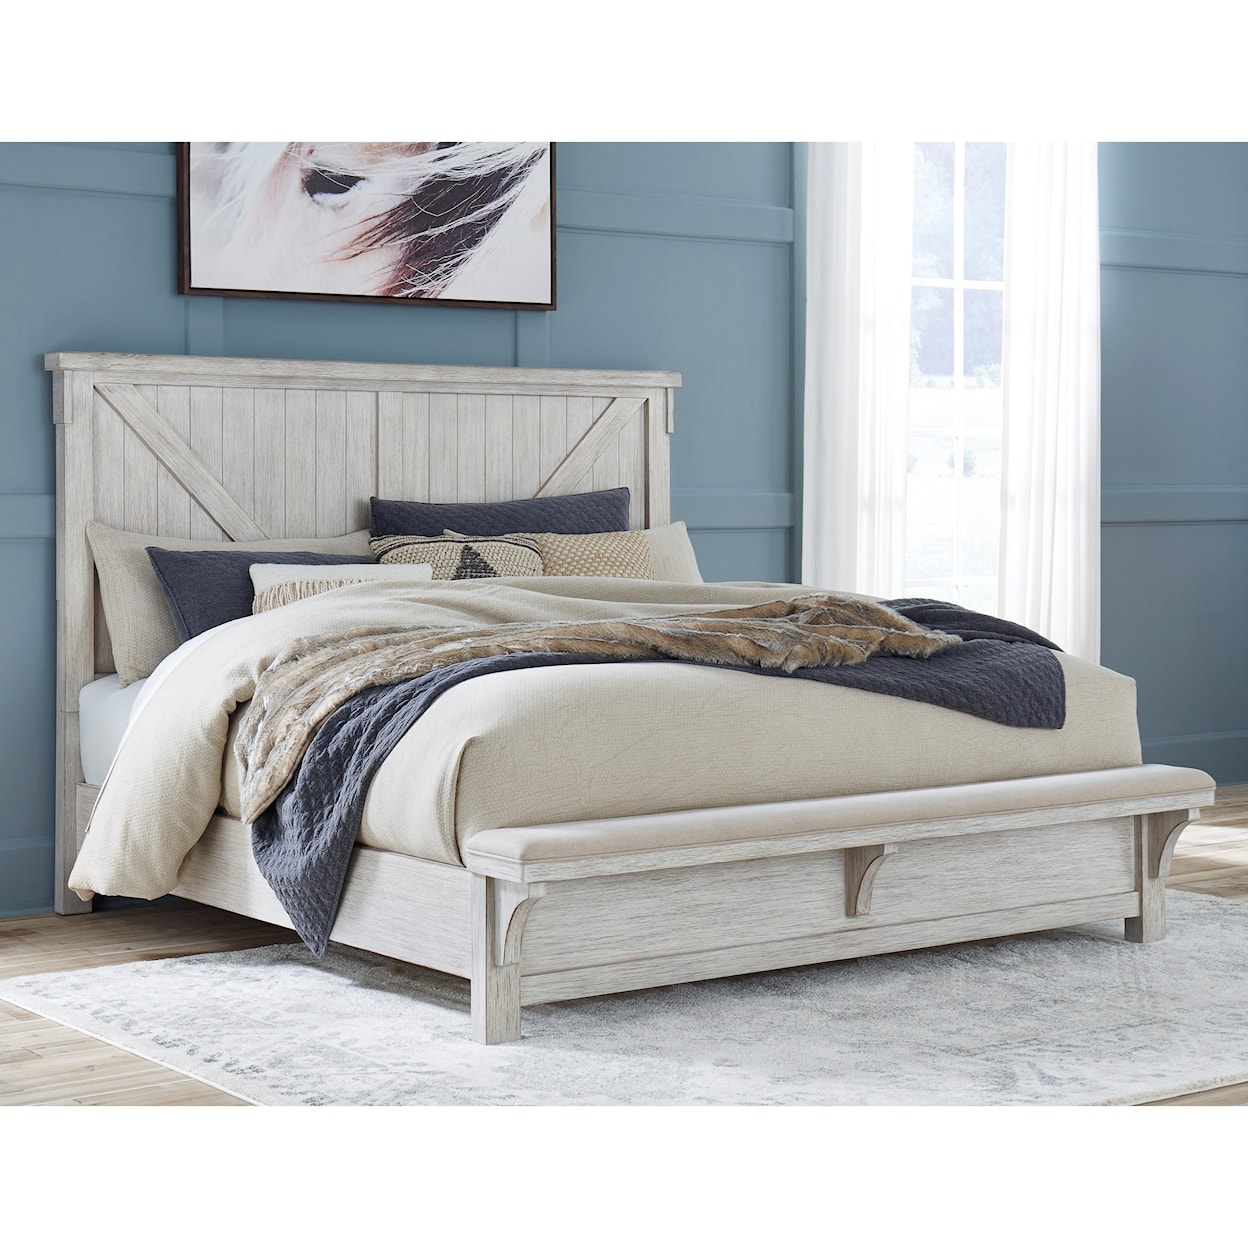 Signature Design by Ashley Furniture Brashland King Bed with Footboard Bench